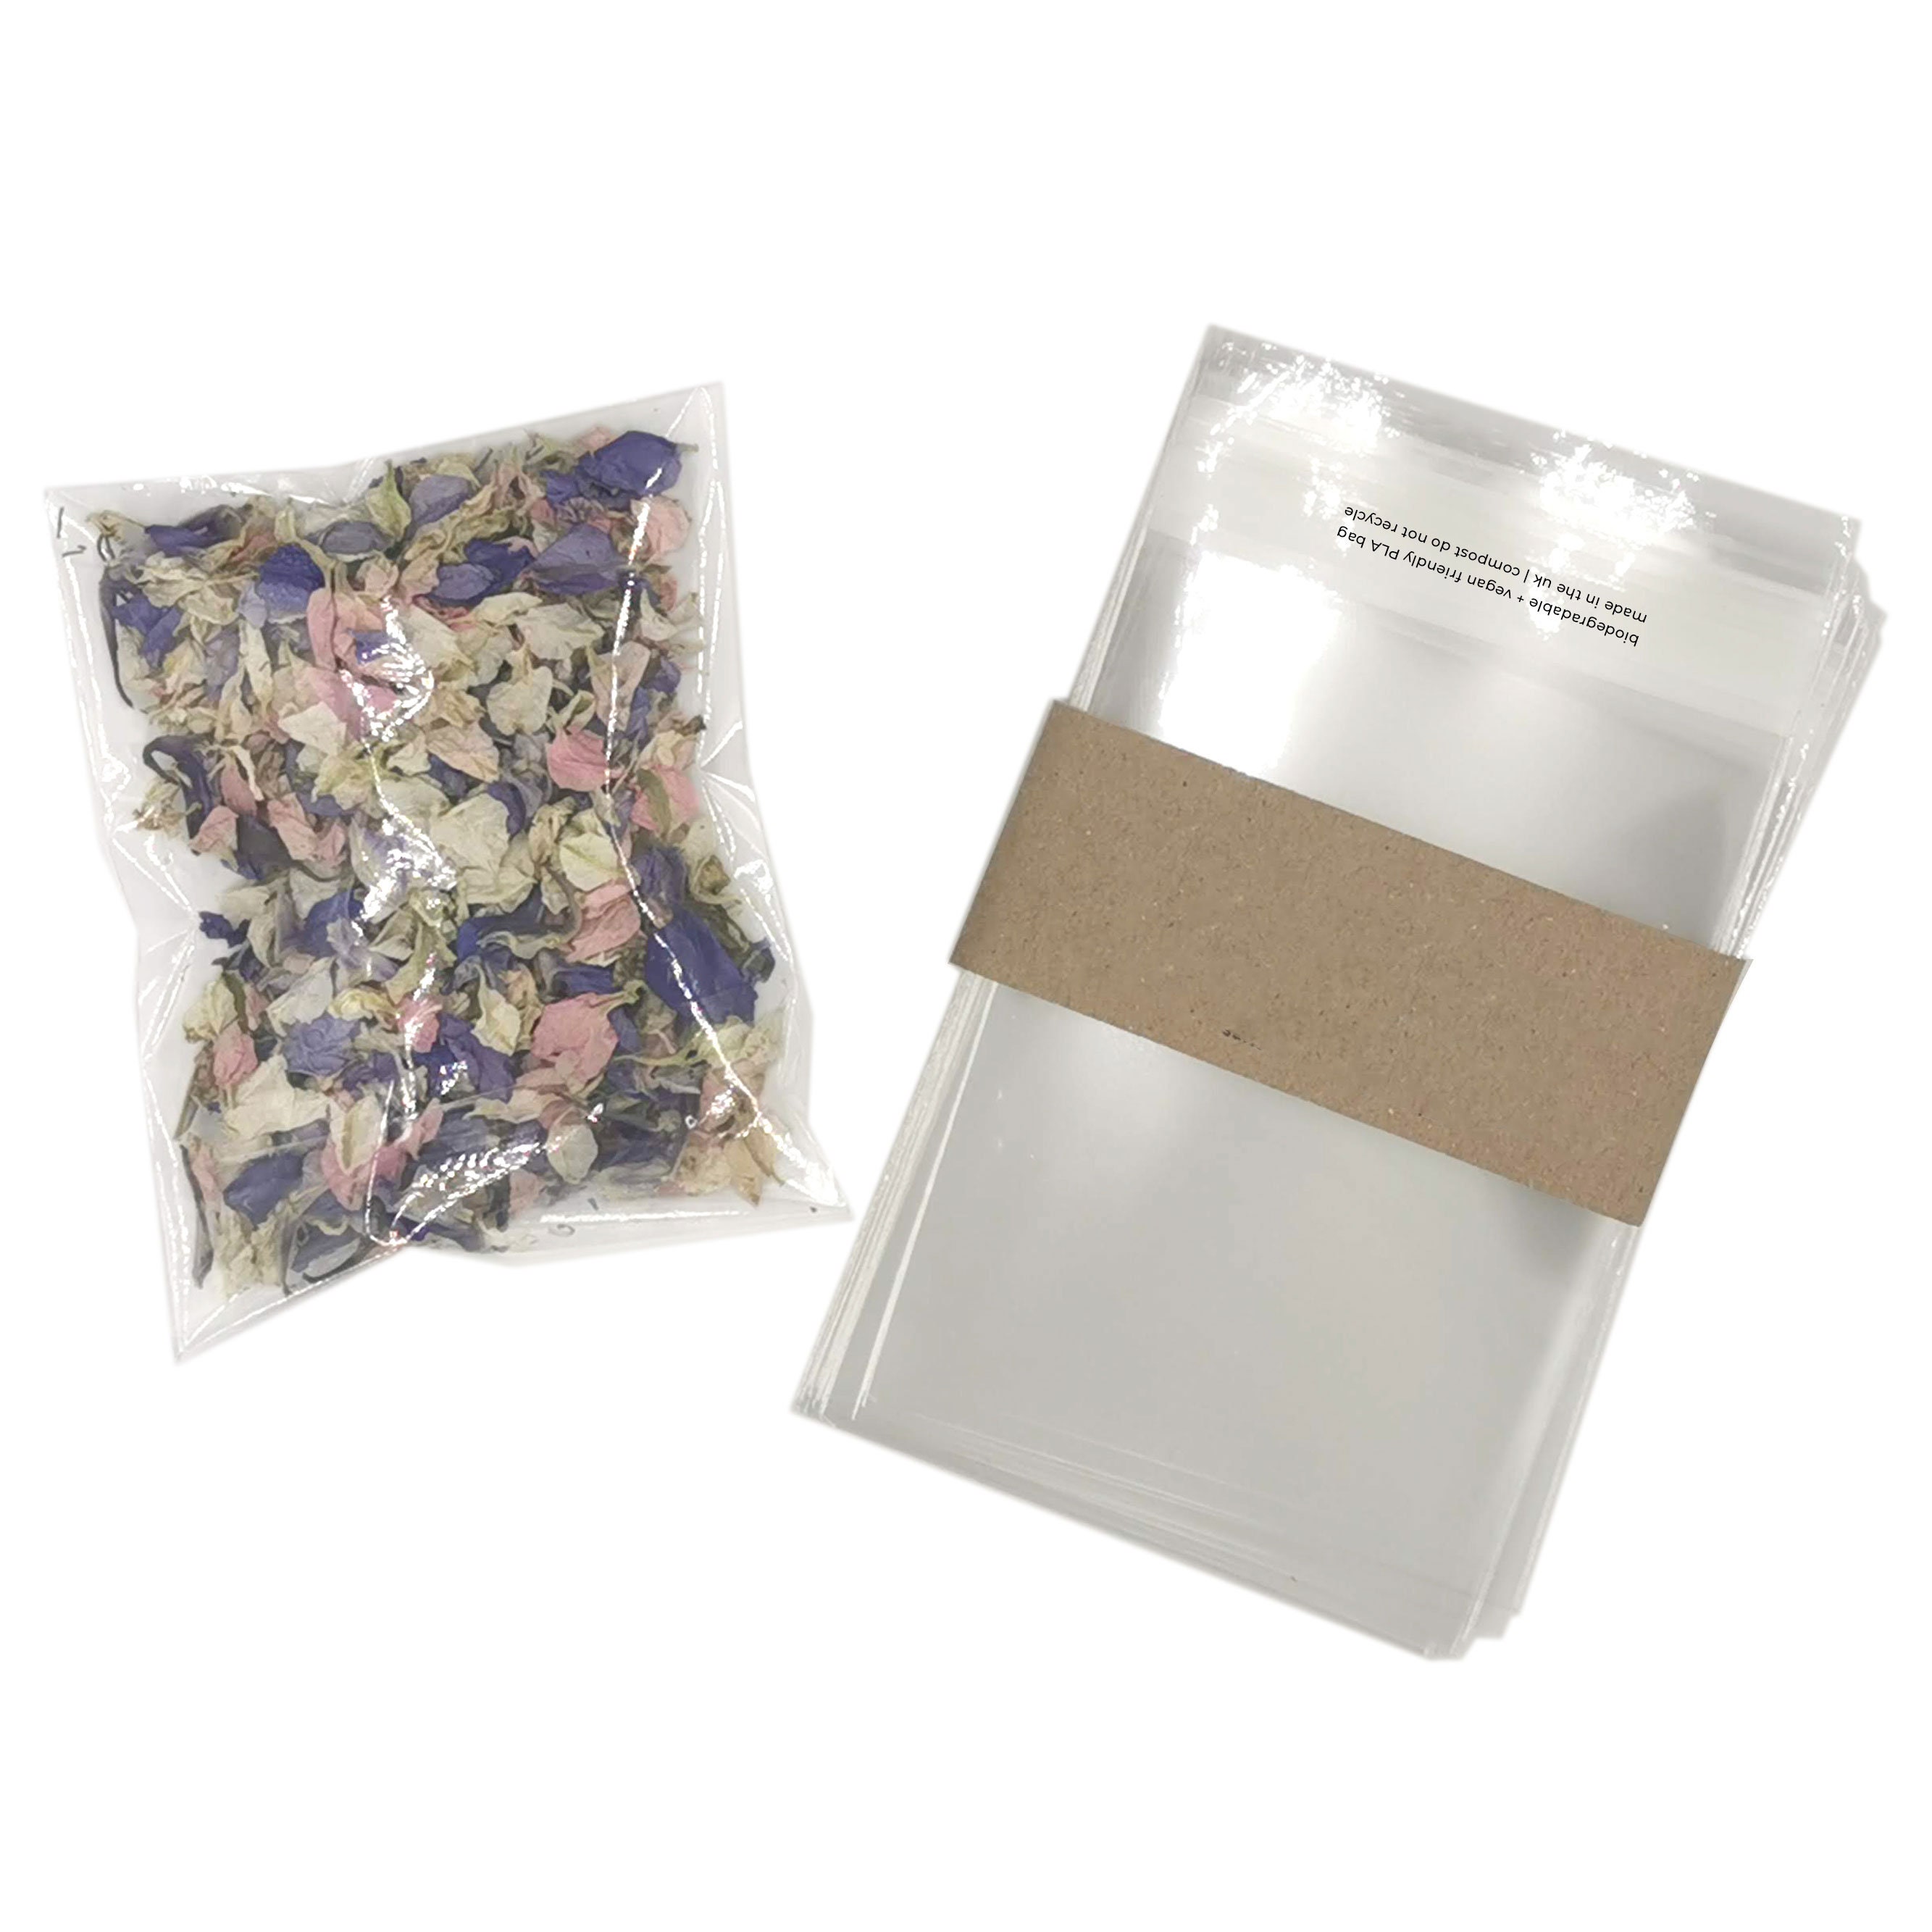 Buy Laminated Strength 5x7 Clear Heat Sealable Treat Bags